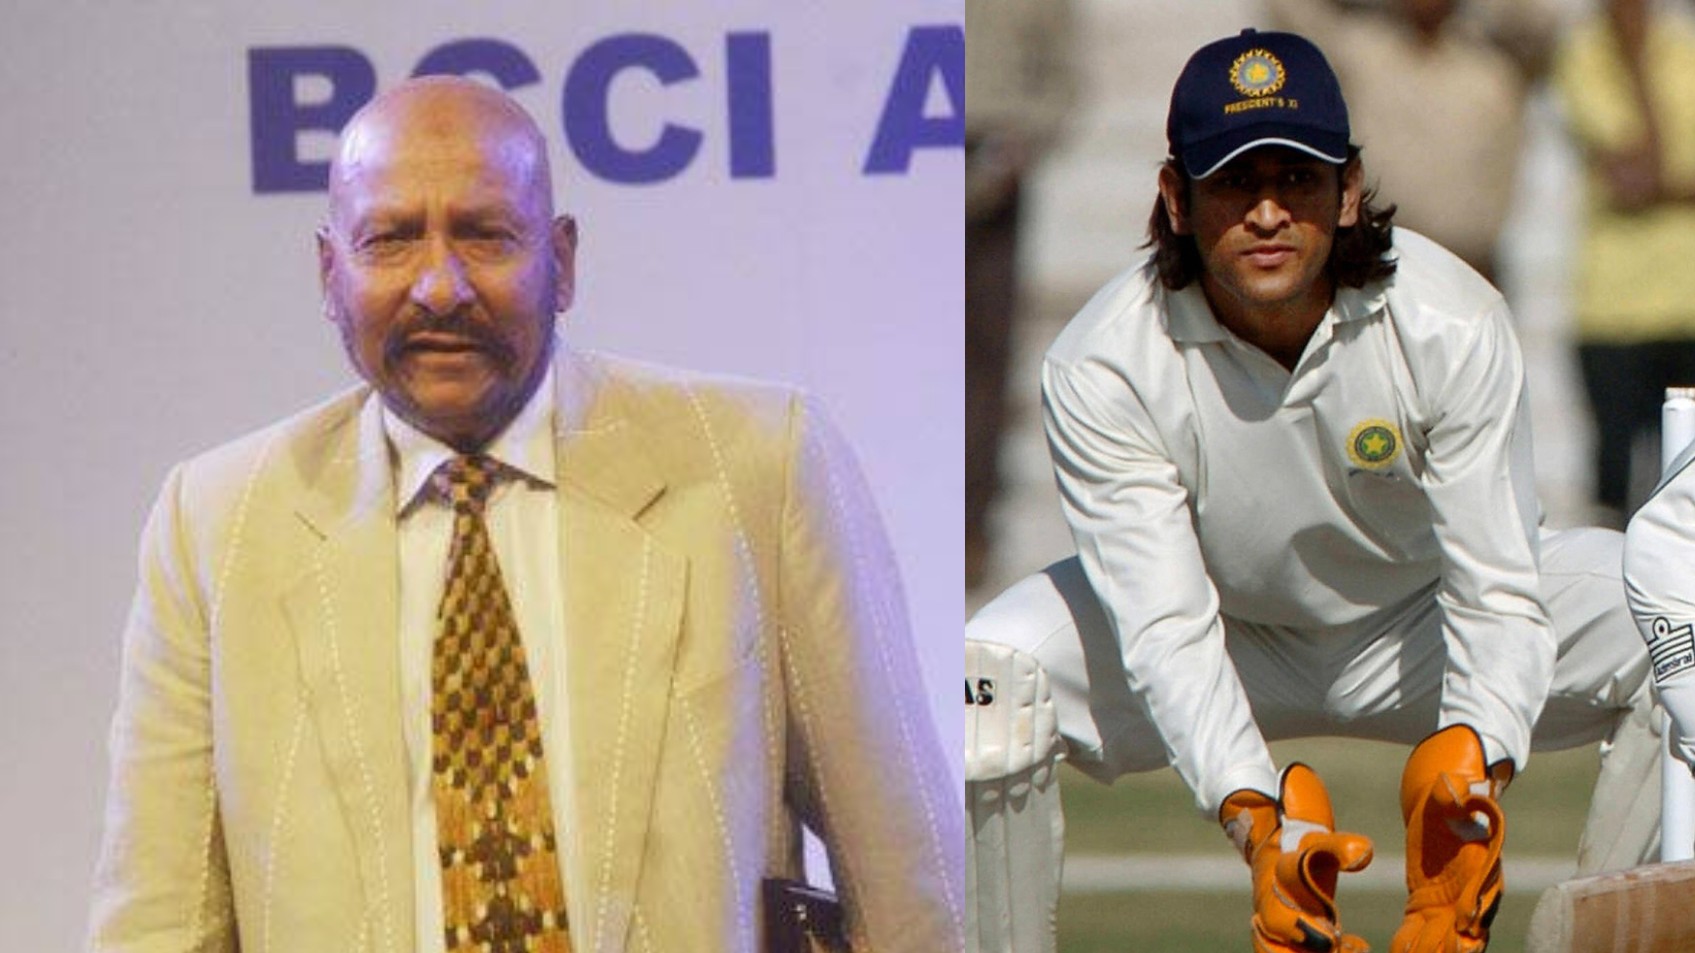 Syed Kirmani retells the story of how MS Dhoni was spotted and selected